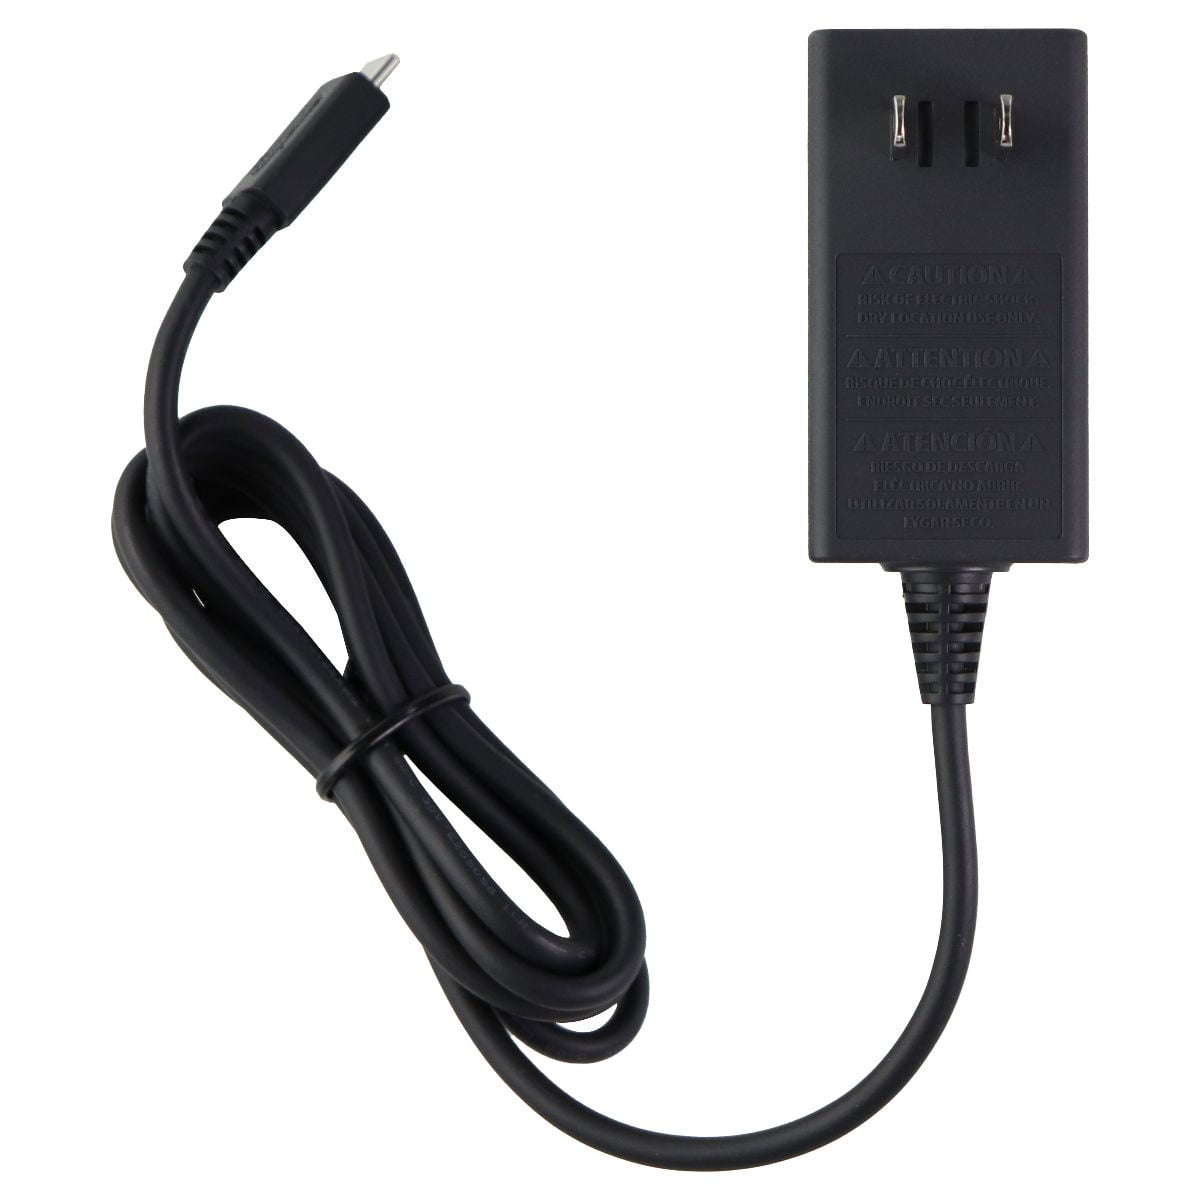 Restored Nintendo Switch AC Adapter Wall Charger USB-C Cable - Black OEM (Refurbished) -